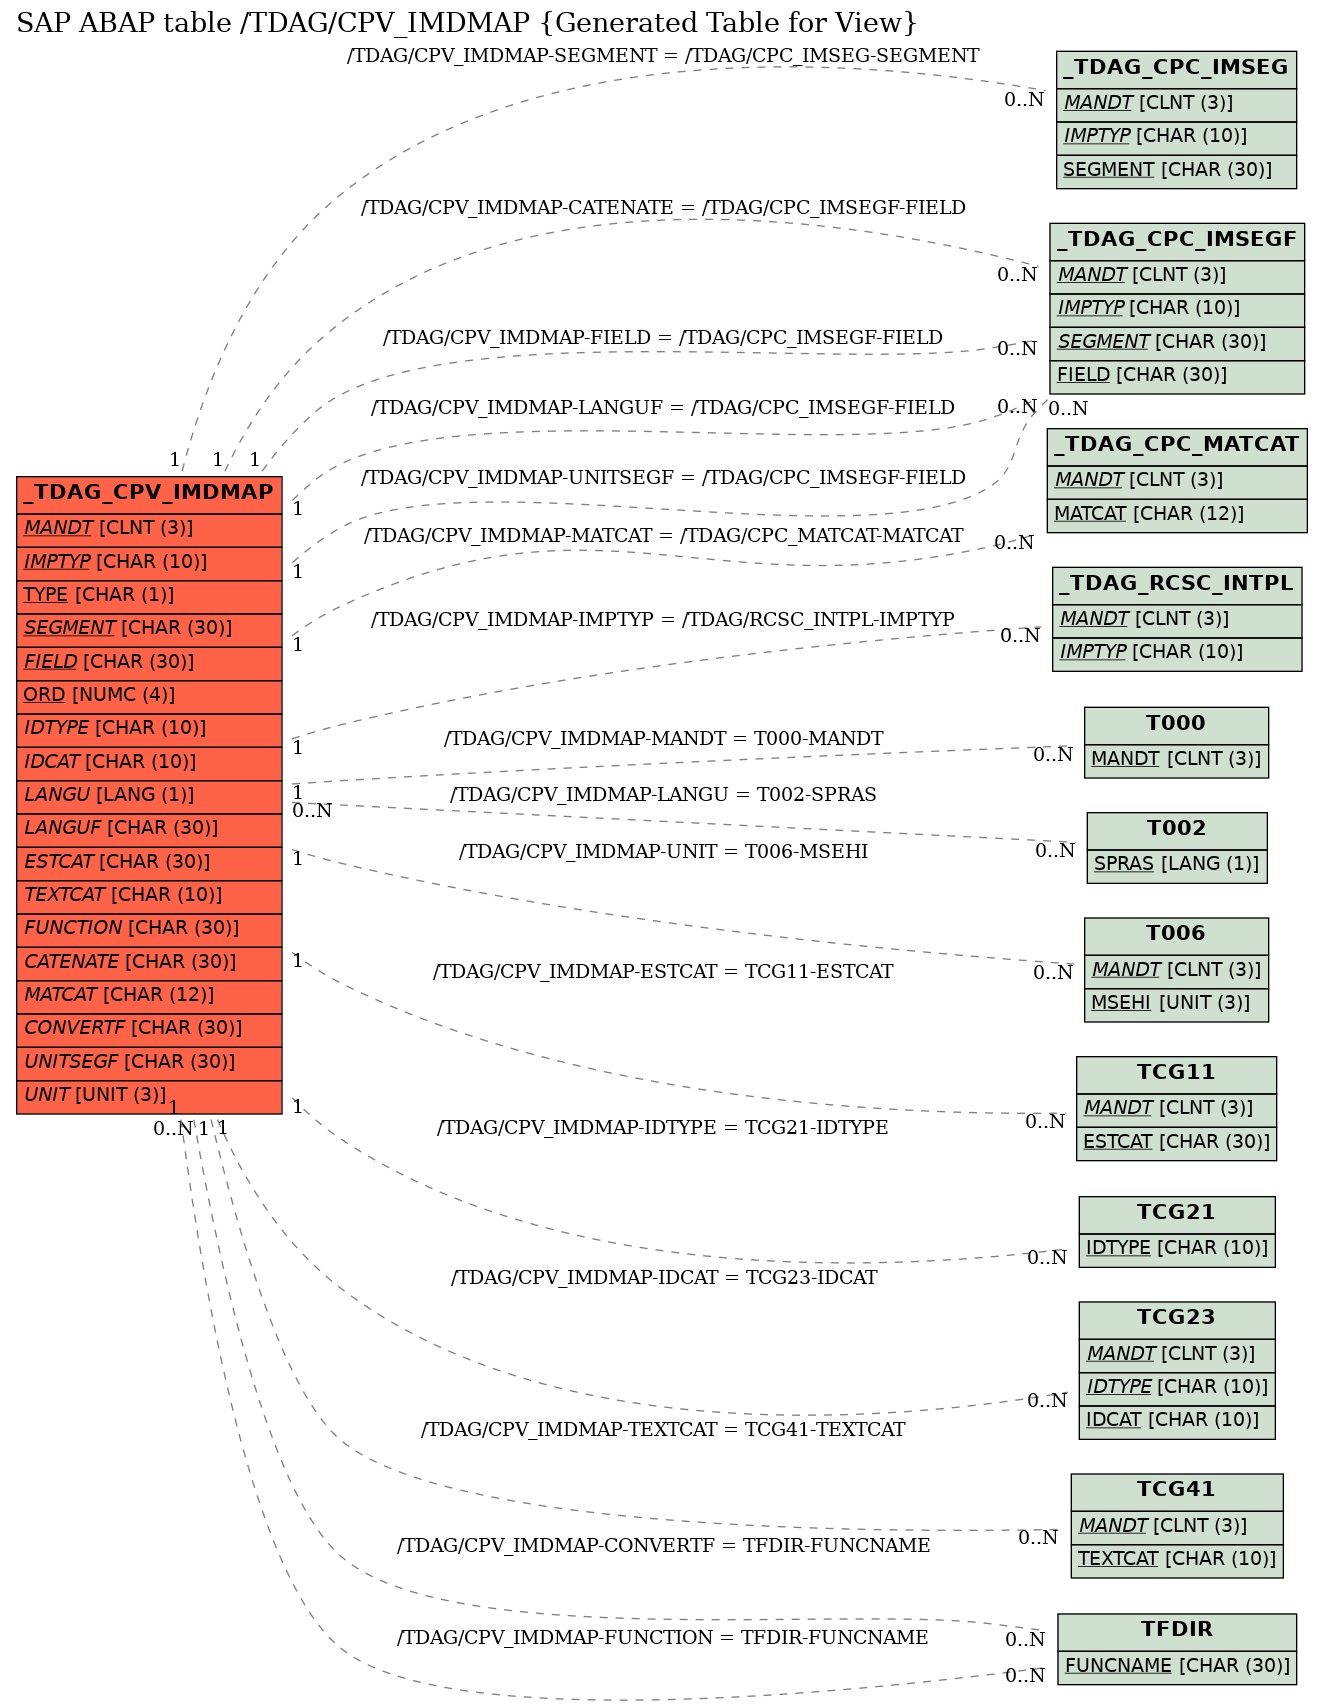 E-R Diagram for table /TDAG/CPV_IMDMAP (Generated Table for View)